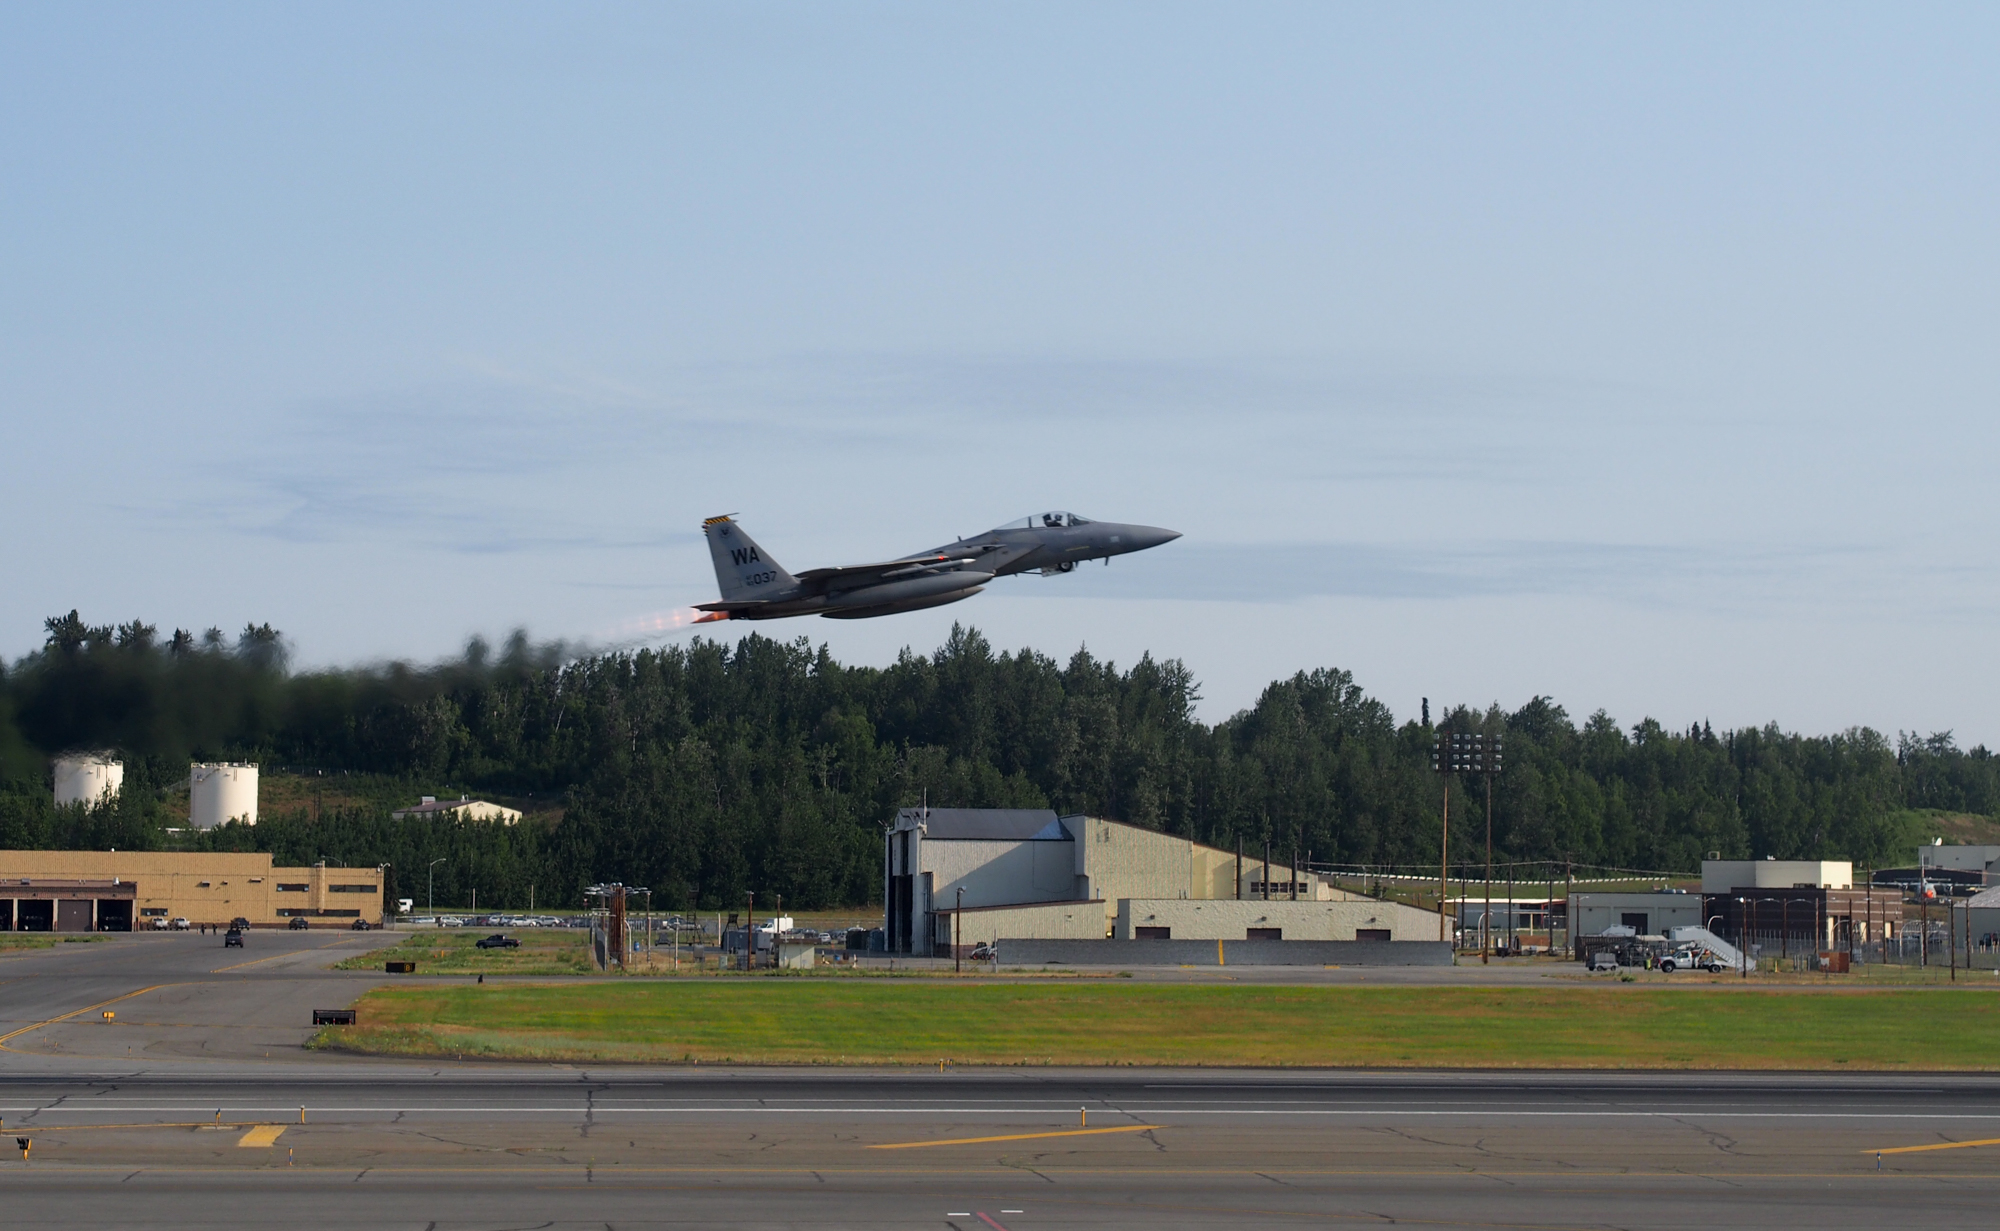 An fighter jet taking off from Joint Base Elmendorf-Richardson during exercises in 2015. (Photo by Zachariah Hughes/Alaska Public Media)